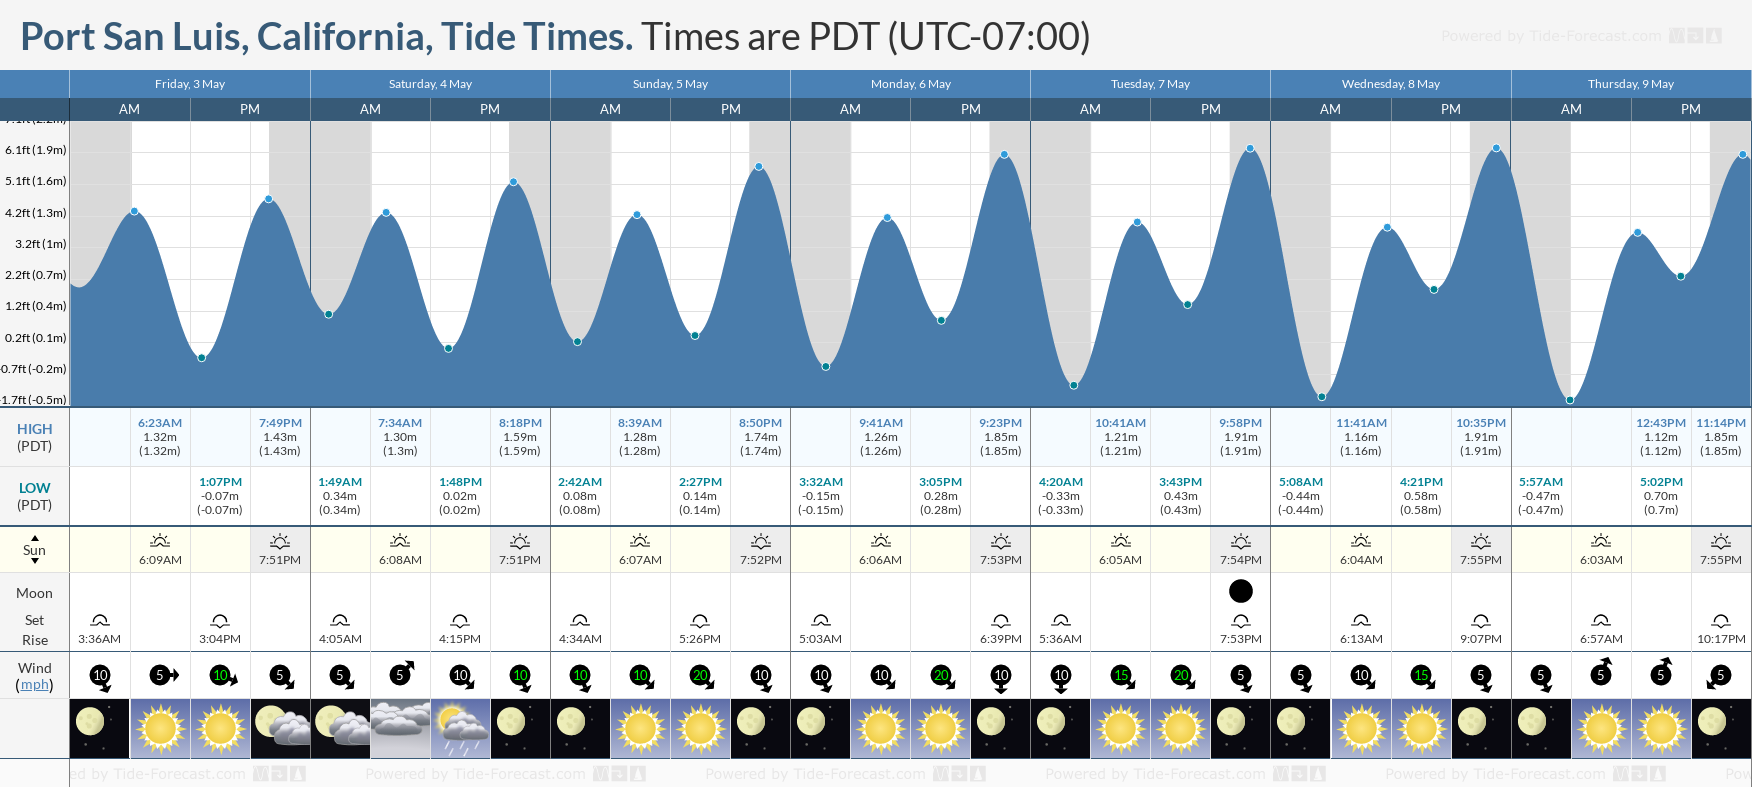 Port San Luis, California Tide Chart including high and low tide tide times for the next 7 days